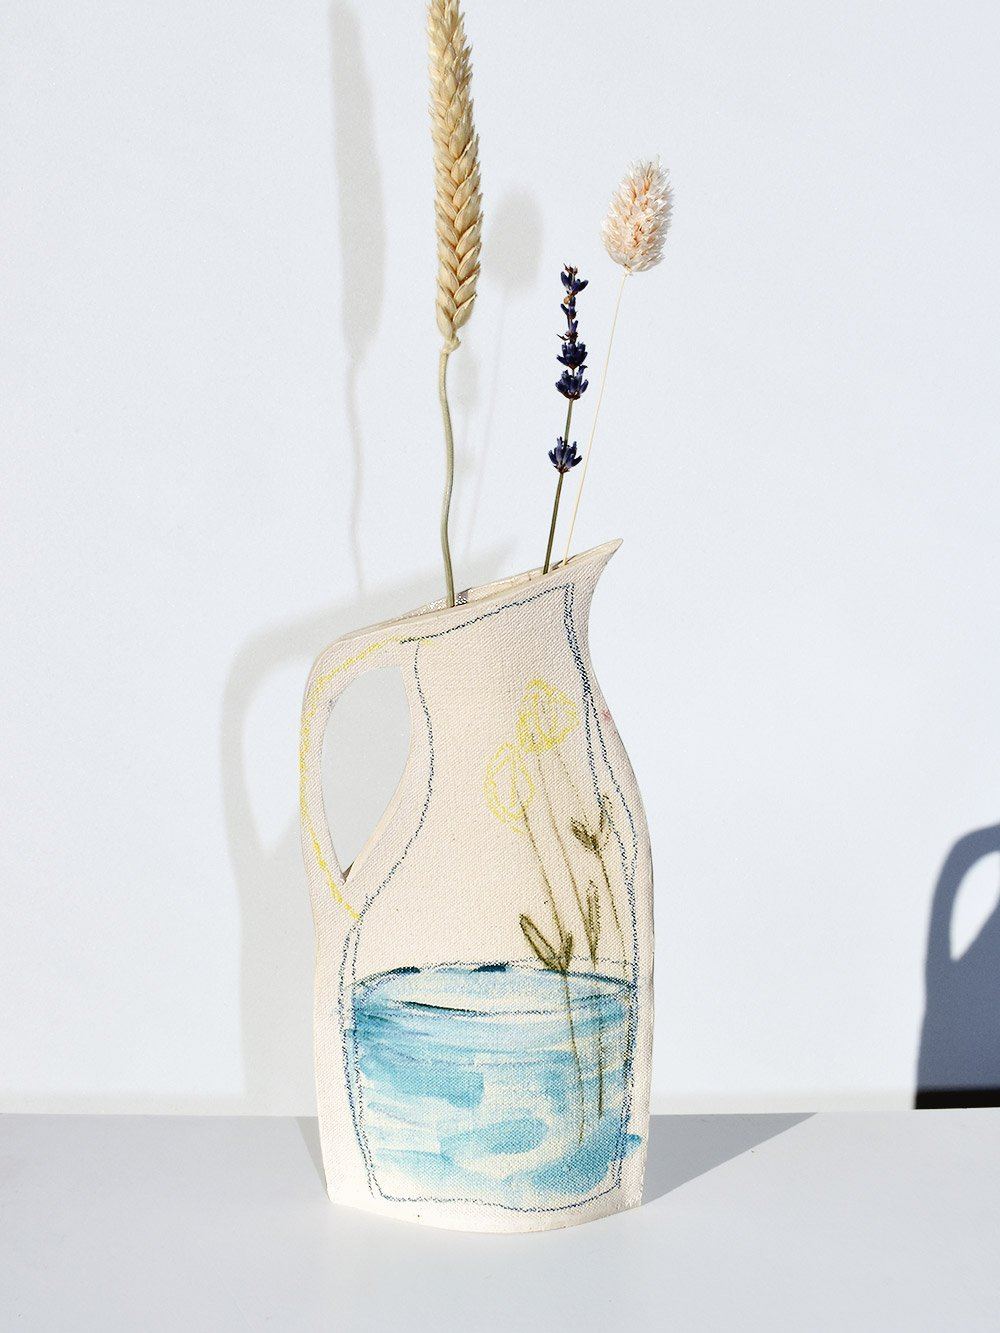 Tall Pitcher With Greenery / Alison Owen